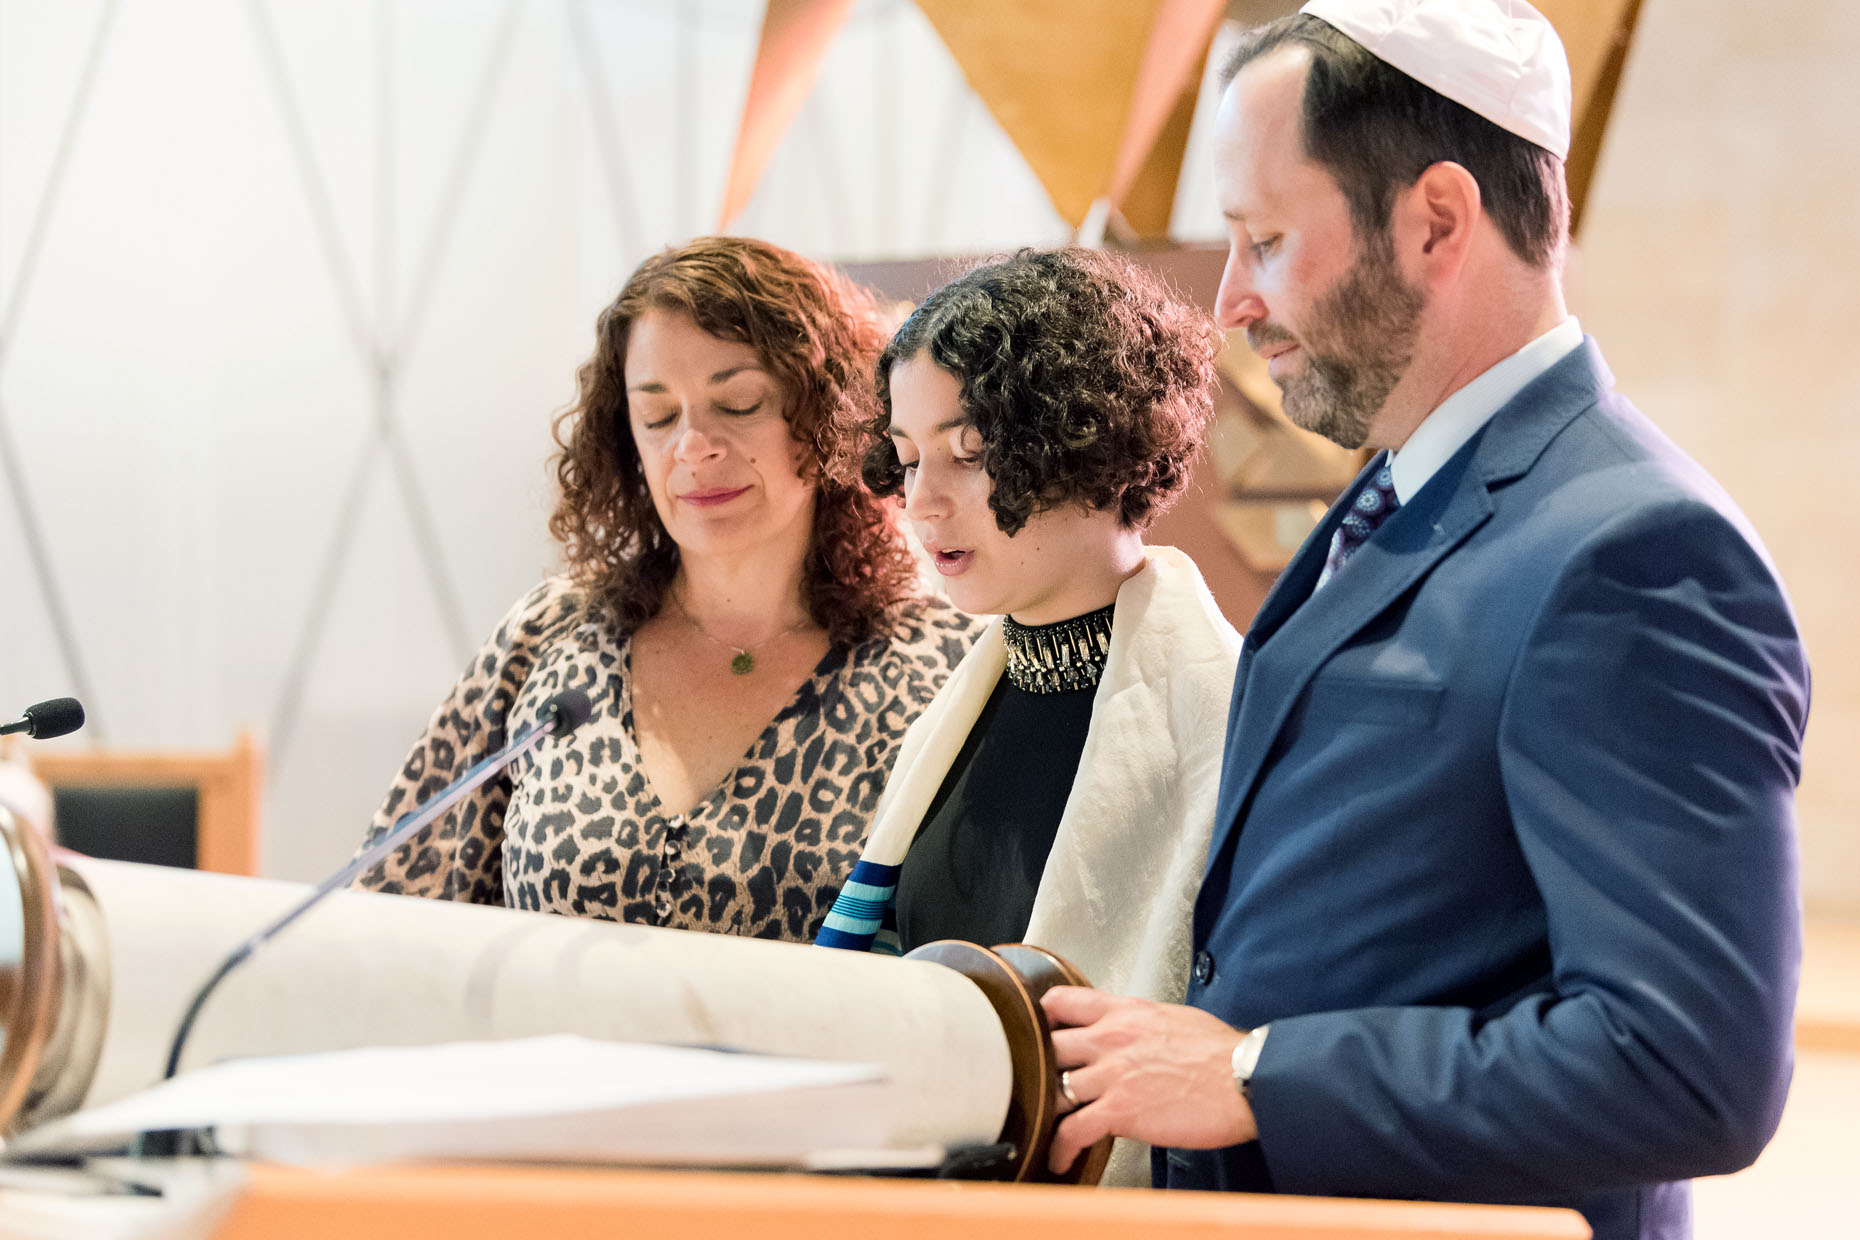 Top Chicago Bar Mitzvah and Family Photographer